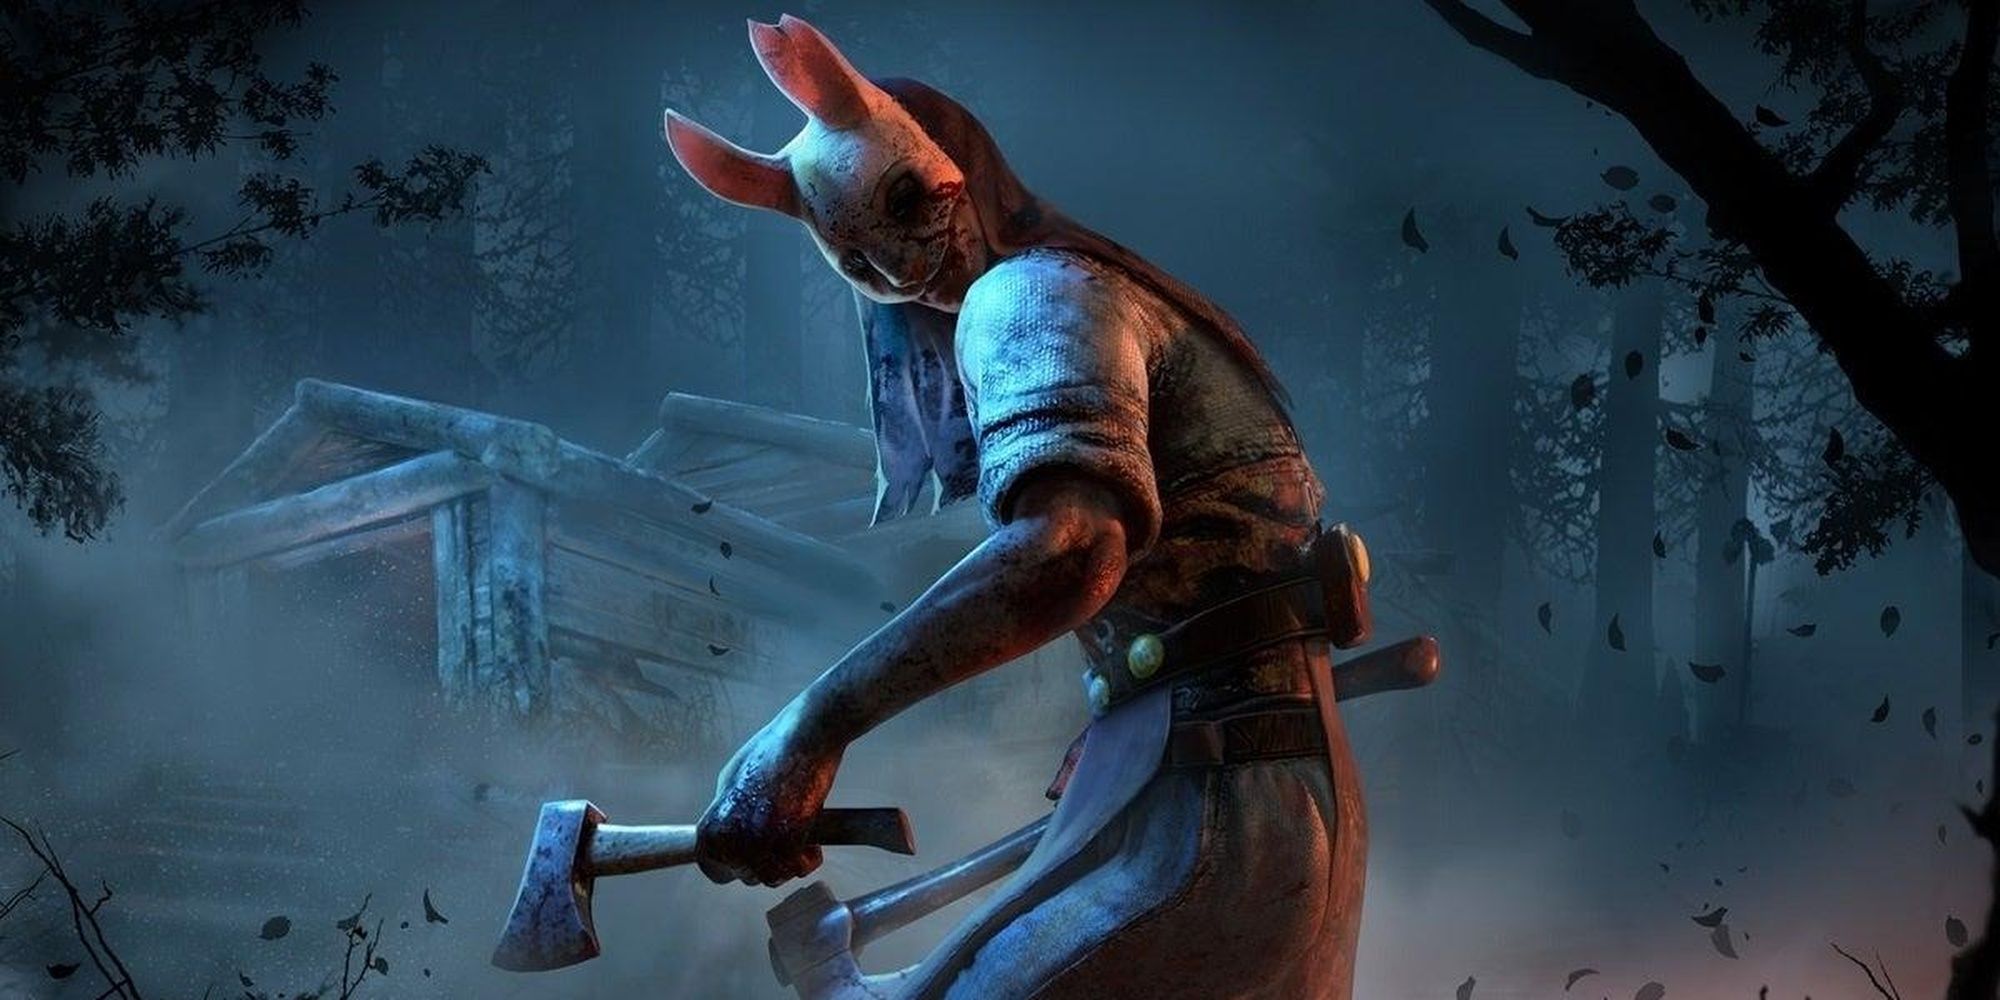 Dead By Daylight: The Huntress Lurking In The Woods